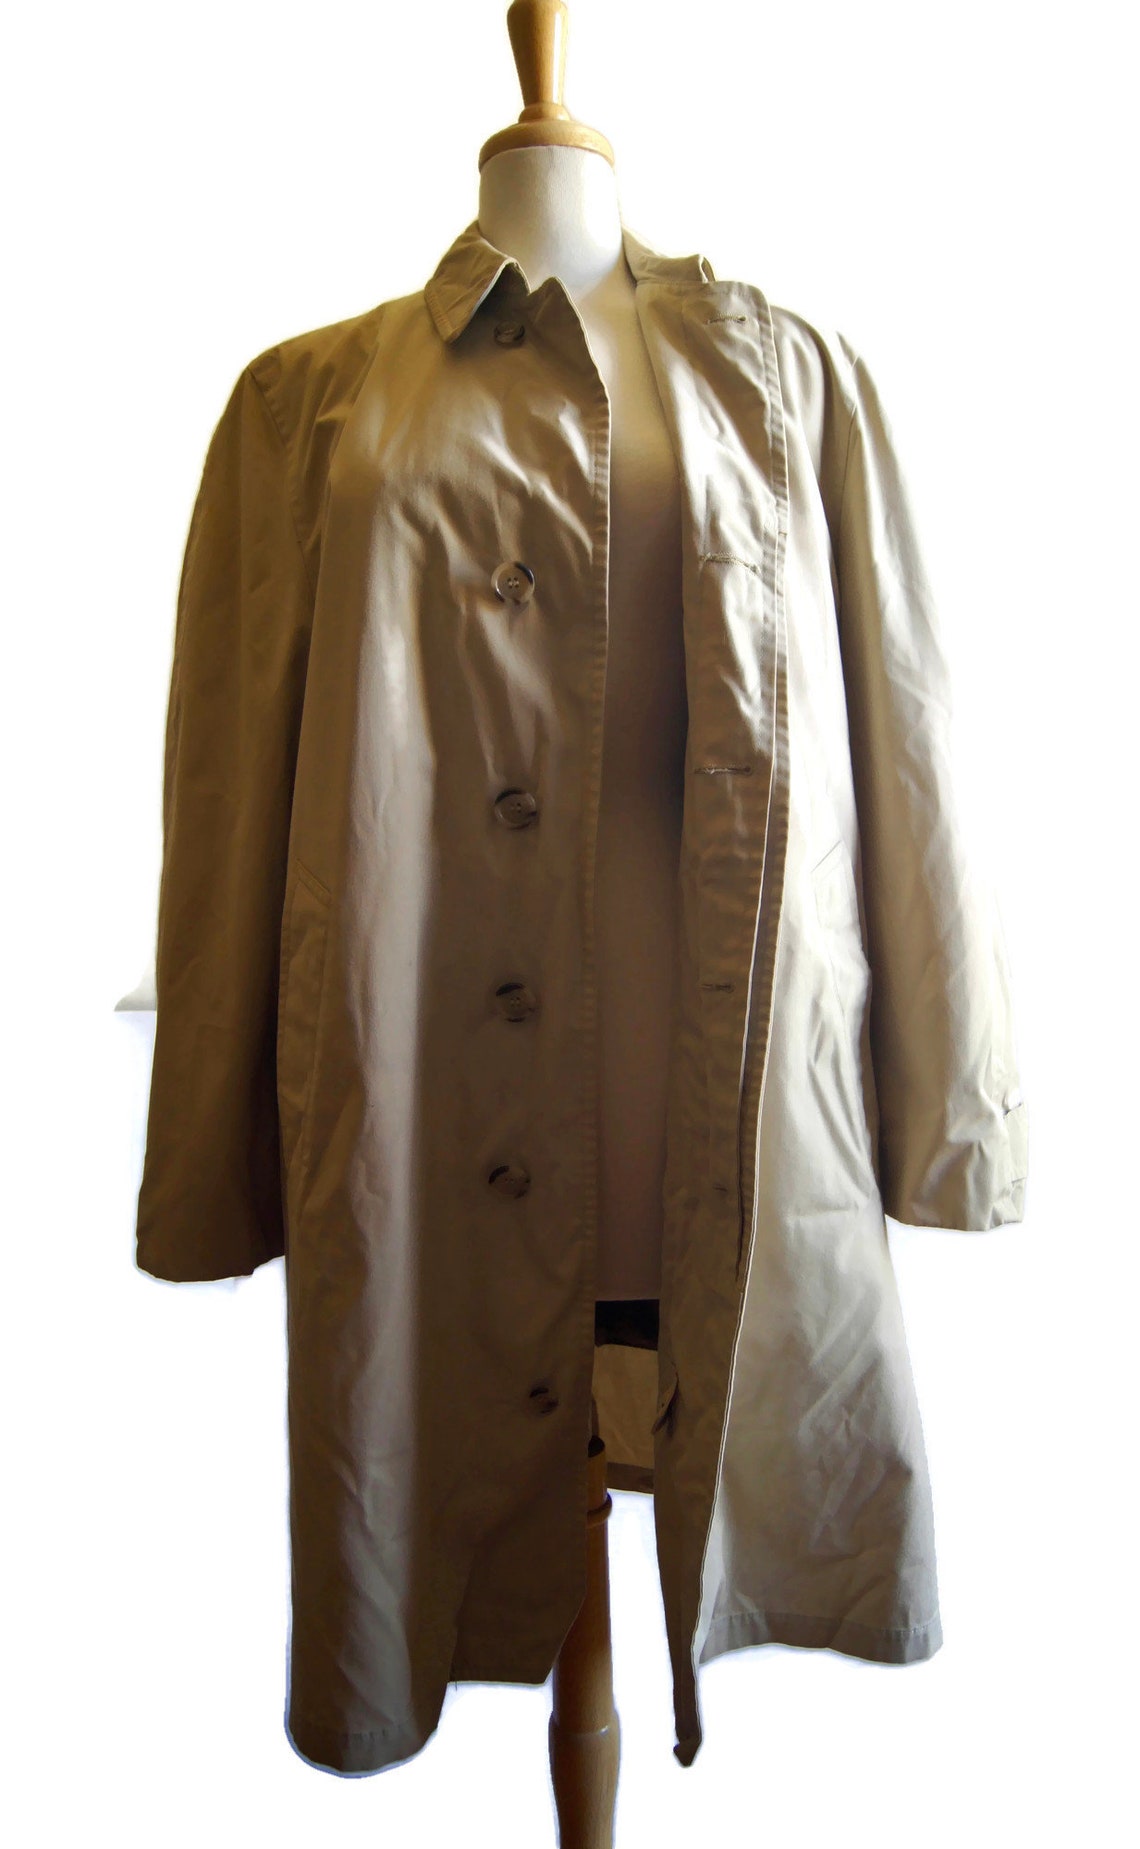 Vintage 1960s London Fog Maincoats Men's Trench Coat Claeth Cloth Size ...